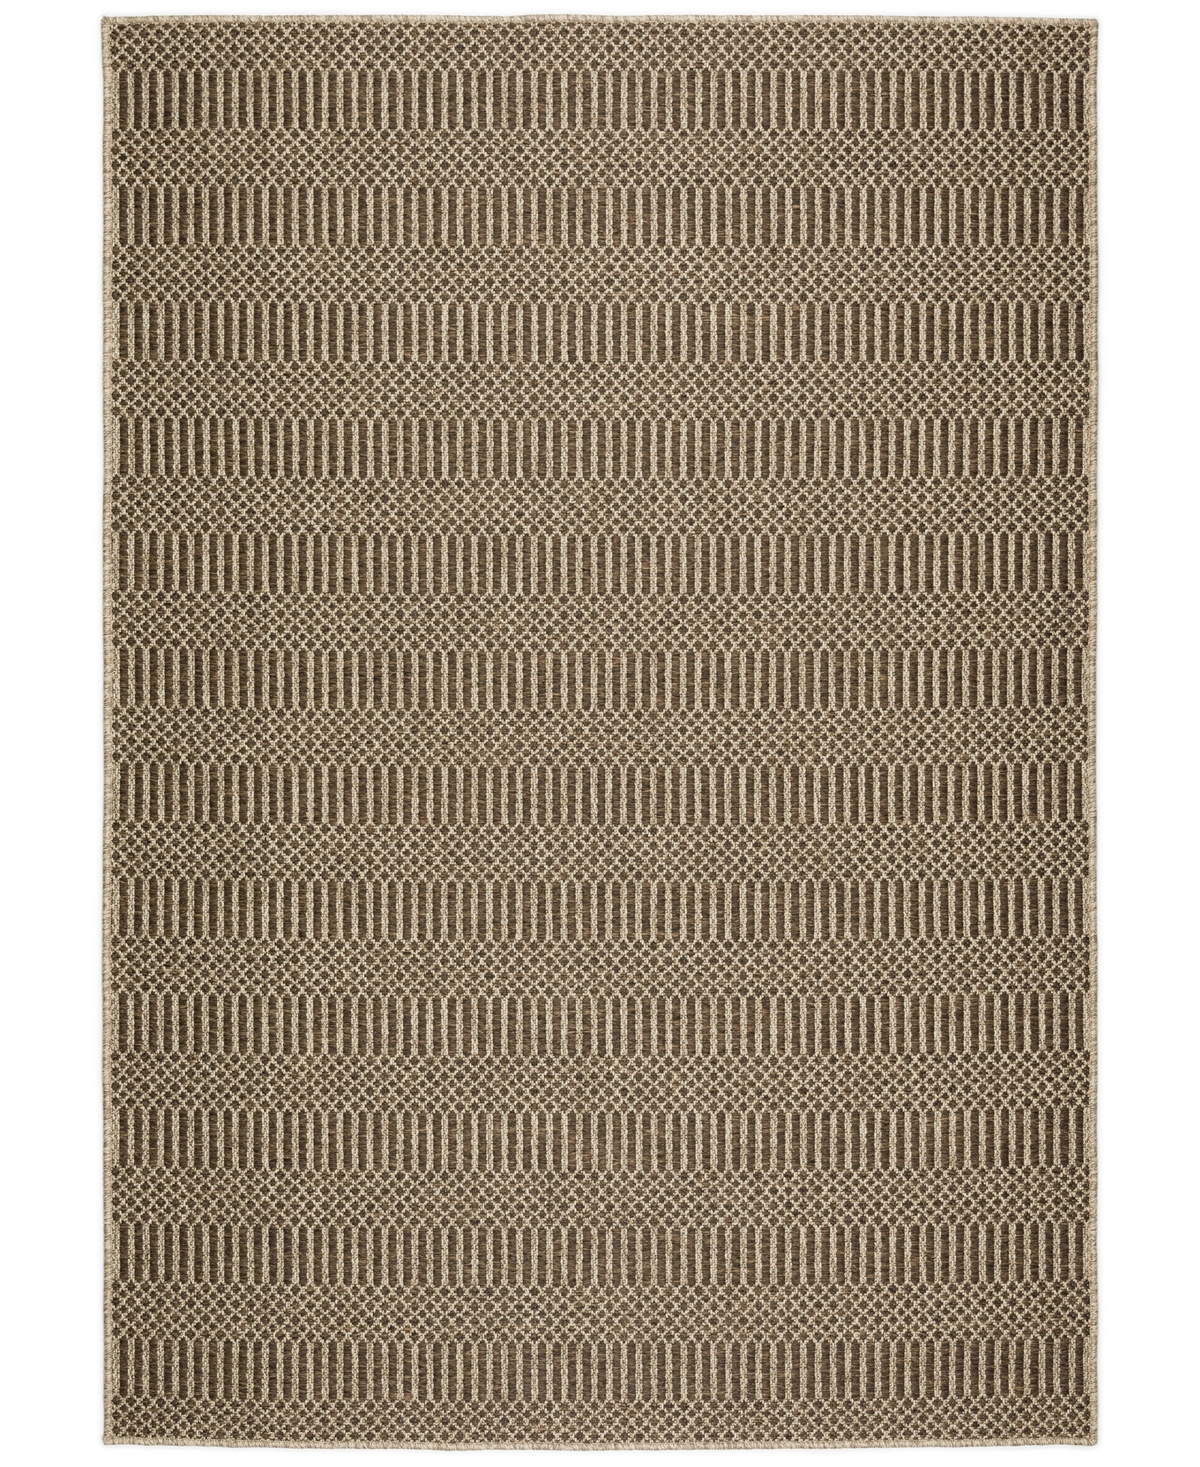 D Style Nusa Outdoor Nsa4 12' X 15' Area Rug In Chocolate